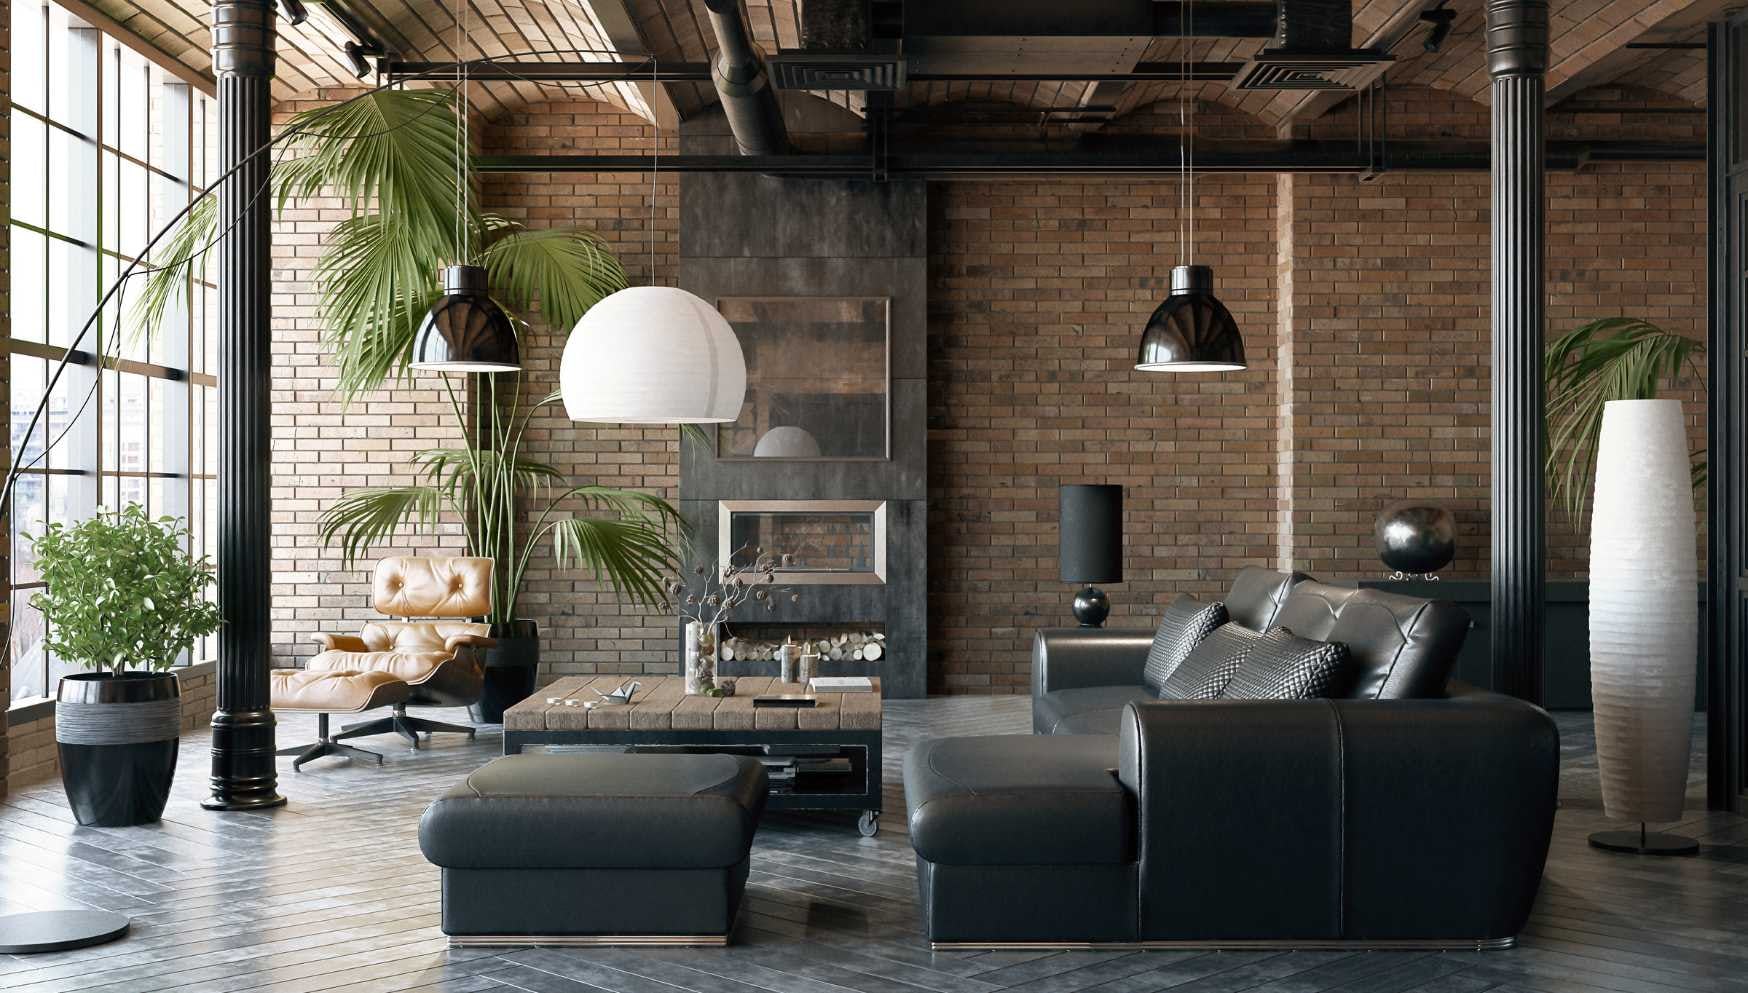 Decorating with houseplants to match your industrial interior